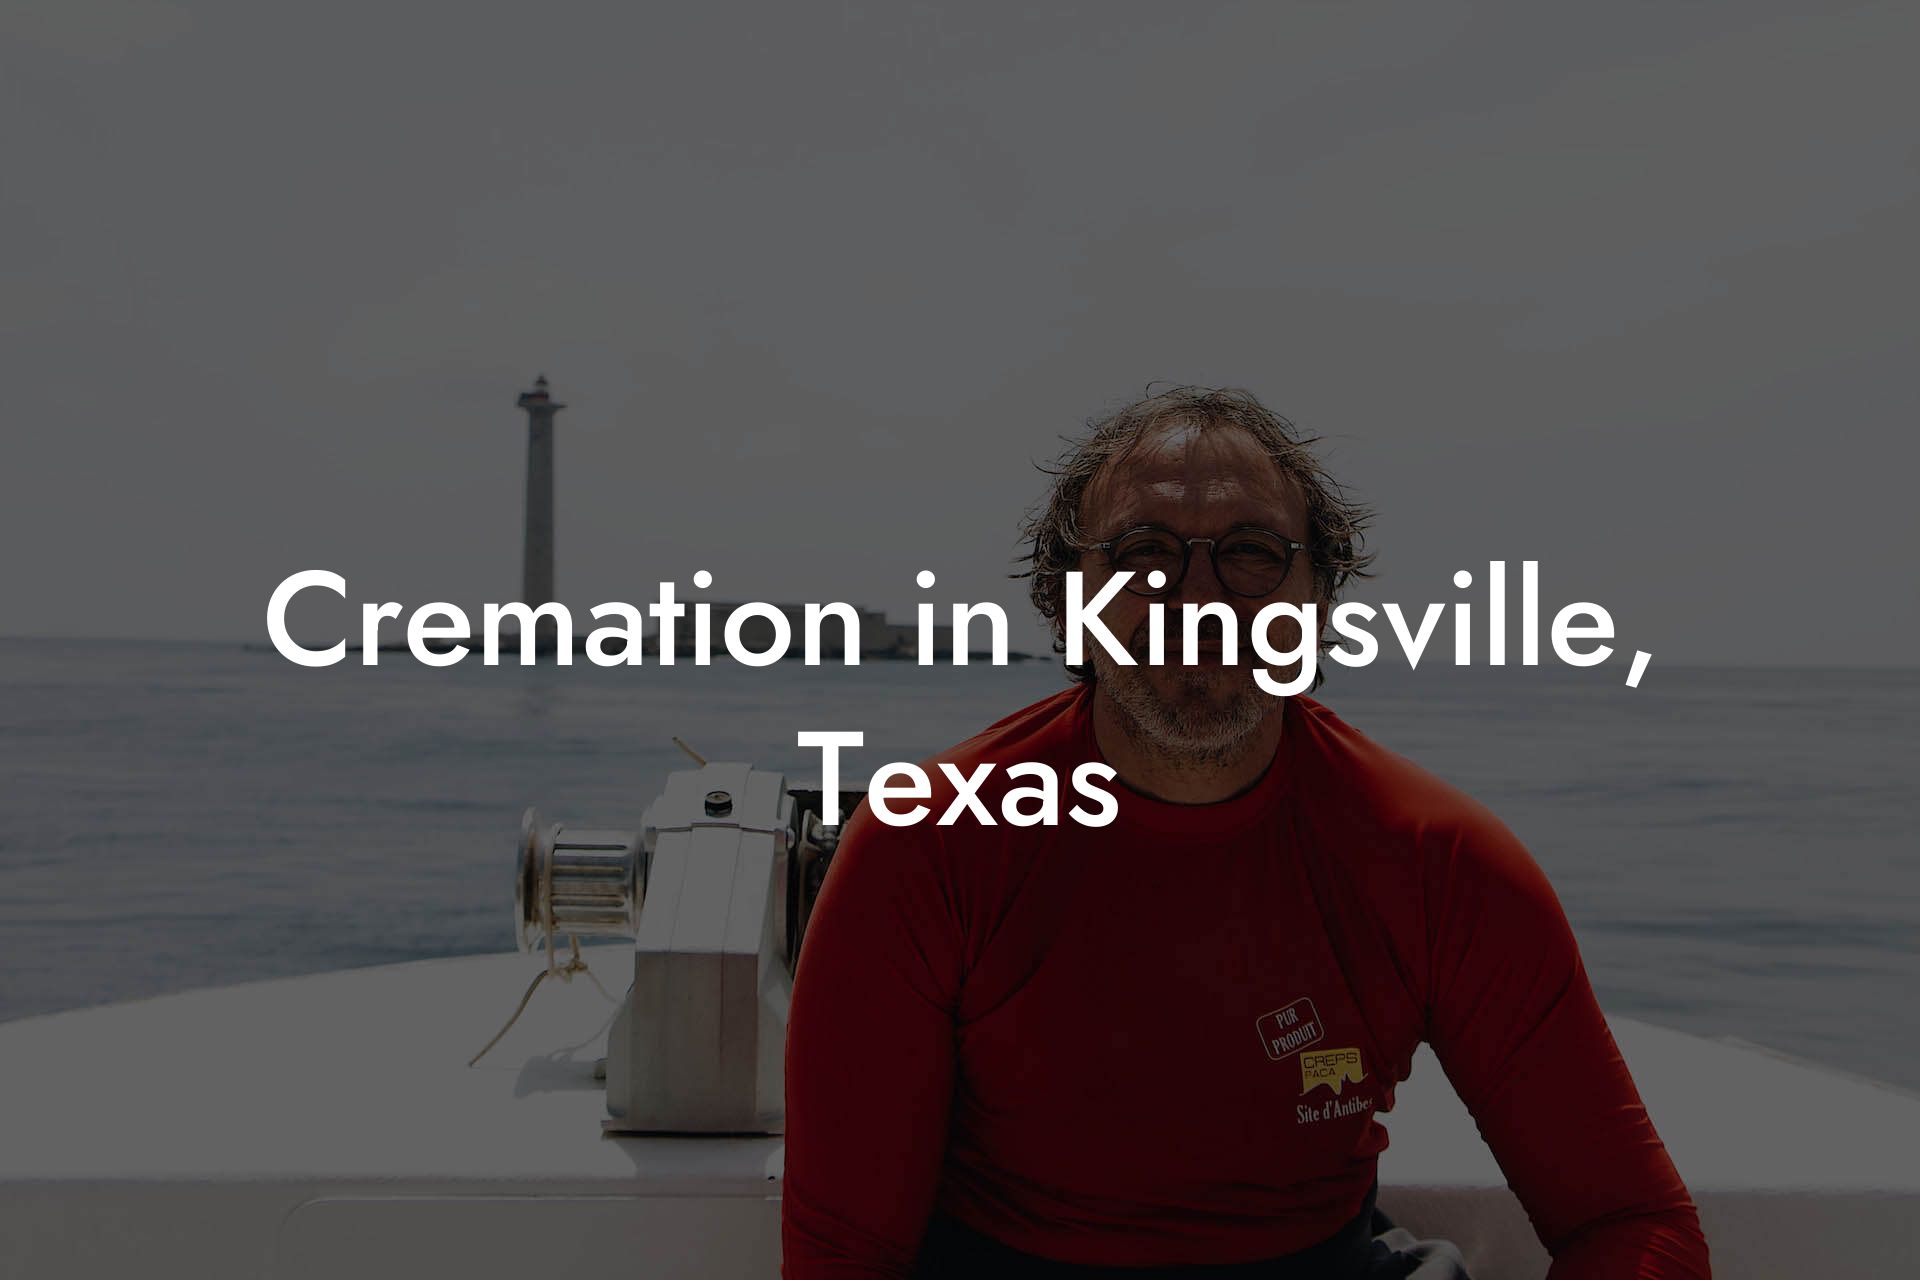 Cremation in Kingsville, Texas